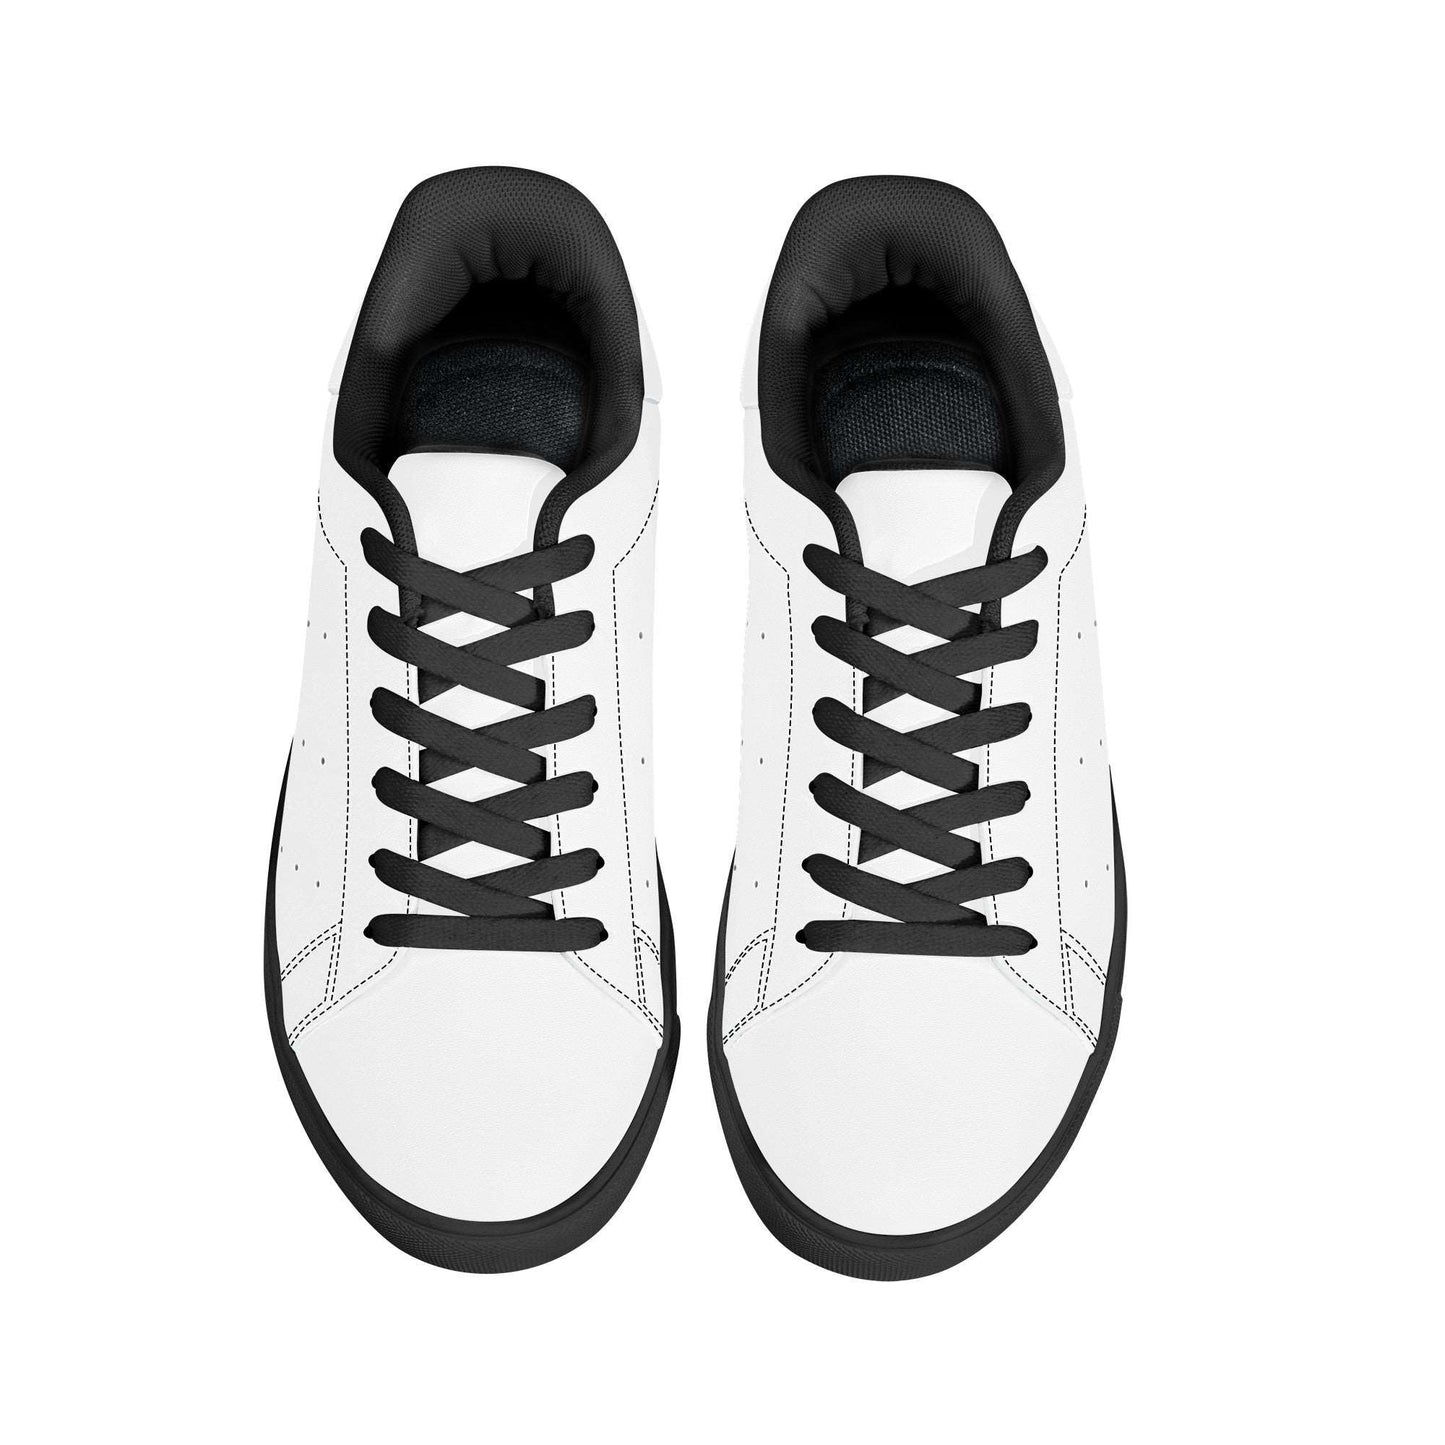 Create Your Own - Low Top Synthetic Leather Sneakers - Black - HayGoodies